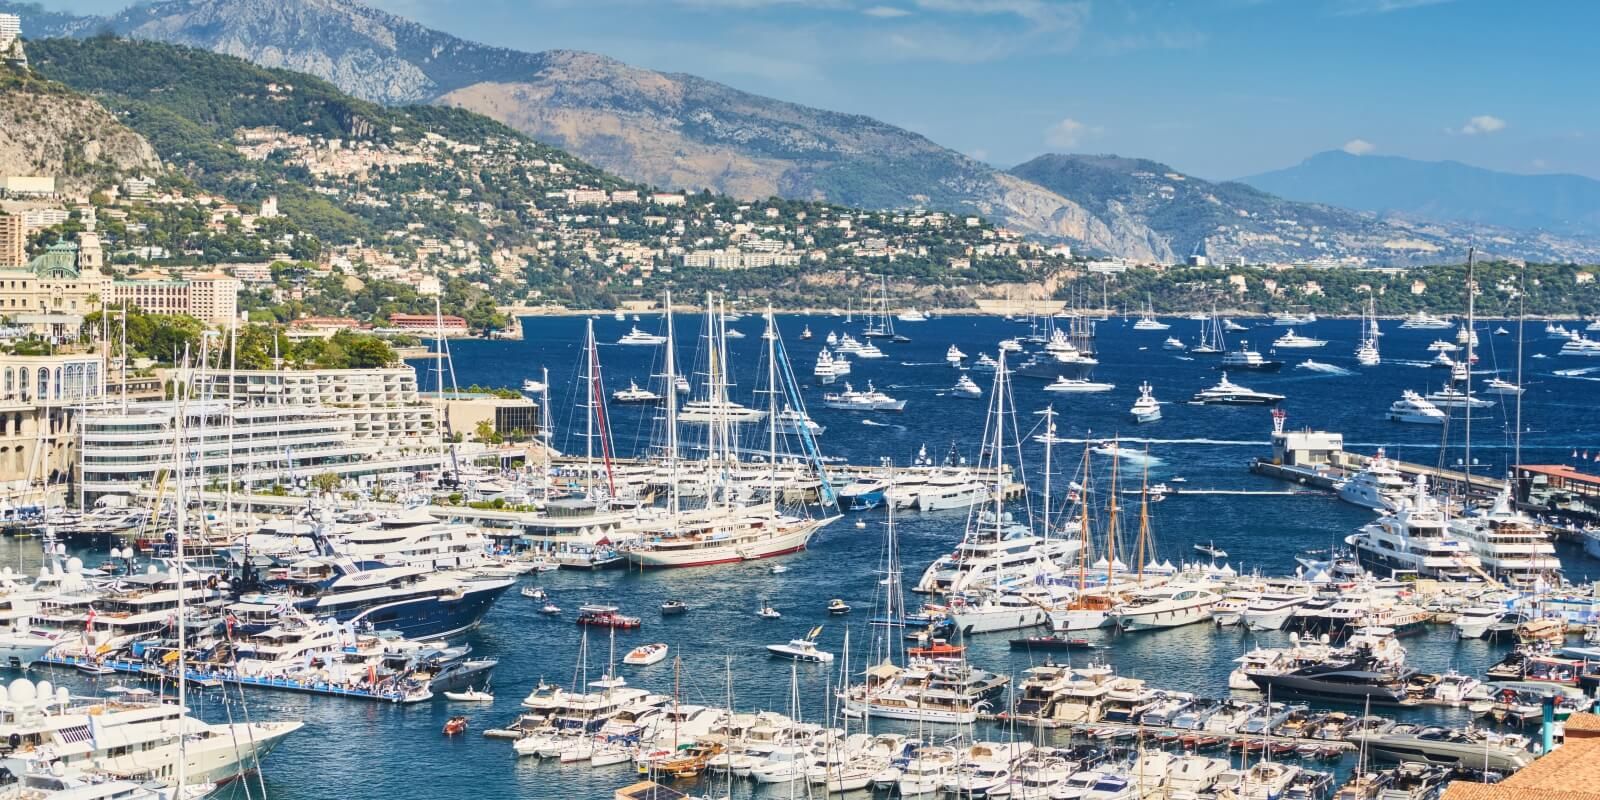 https://www.talamare.com/medias/Port Hercule entrance in Monaco with yachts set up for event yacht charters